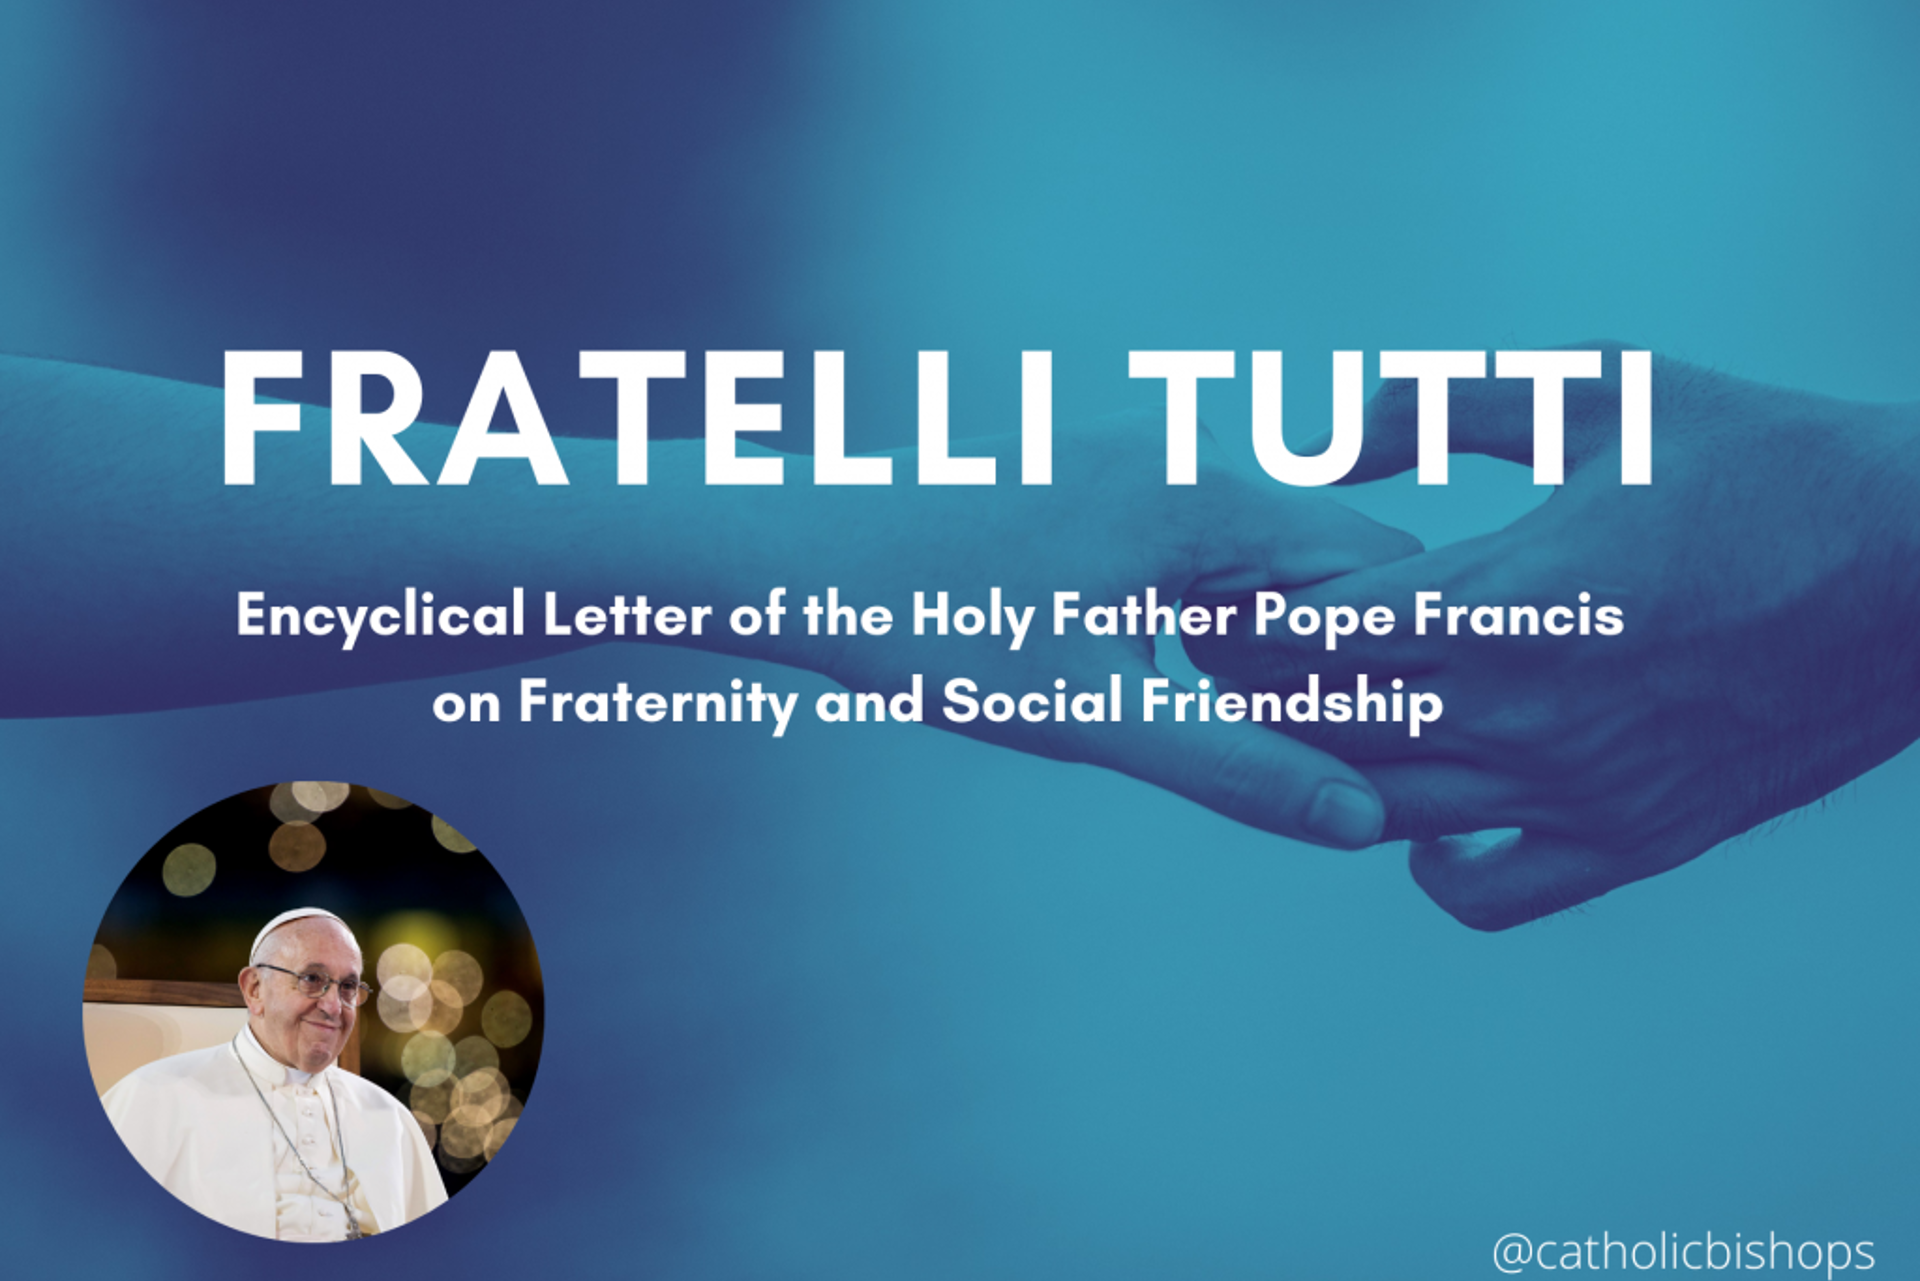 Introduction to 'Fratelli tutti'; encyclical from Pope Francis